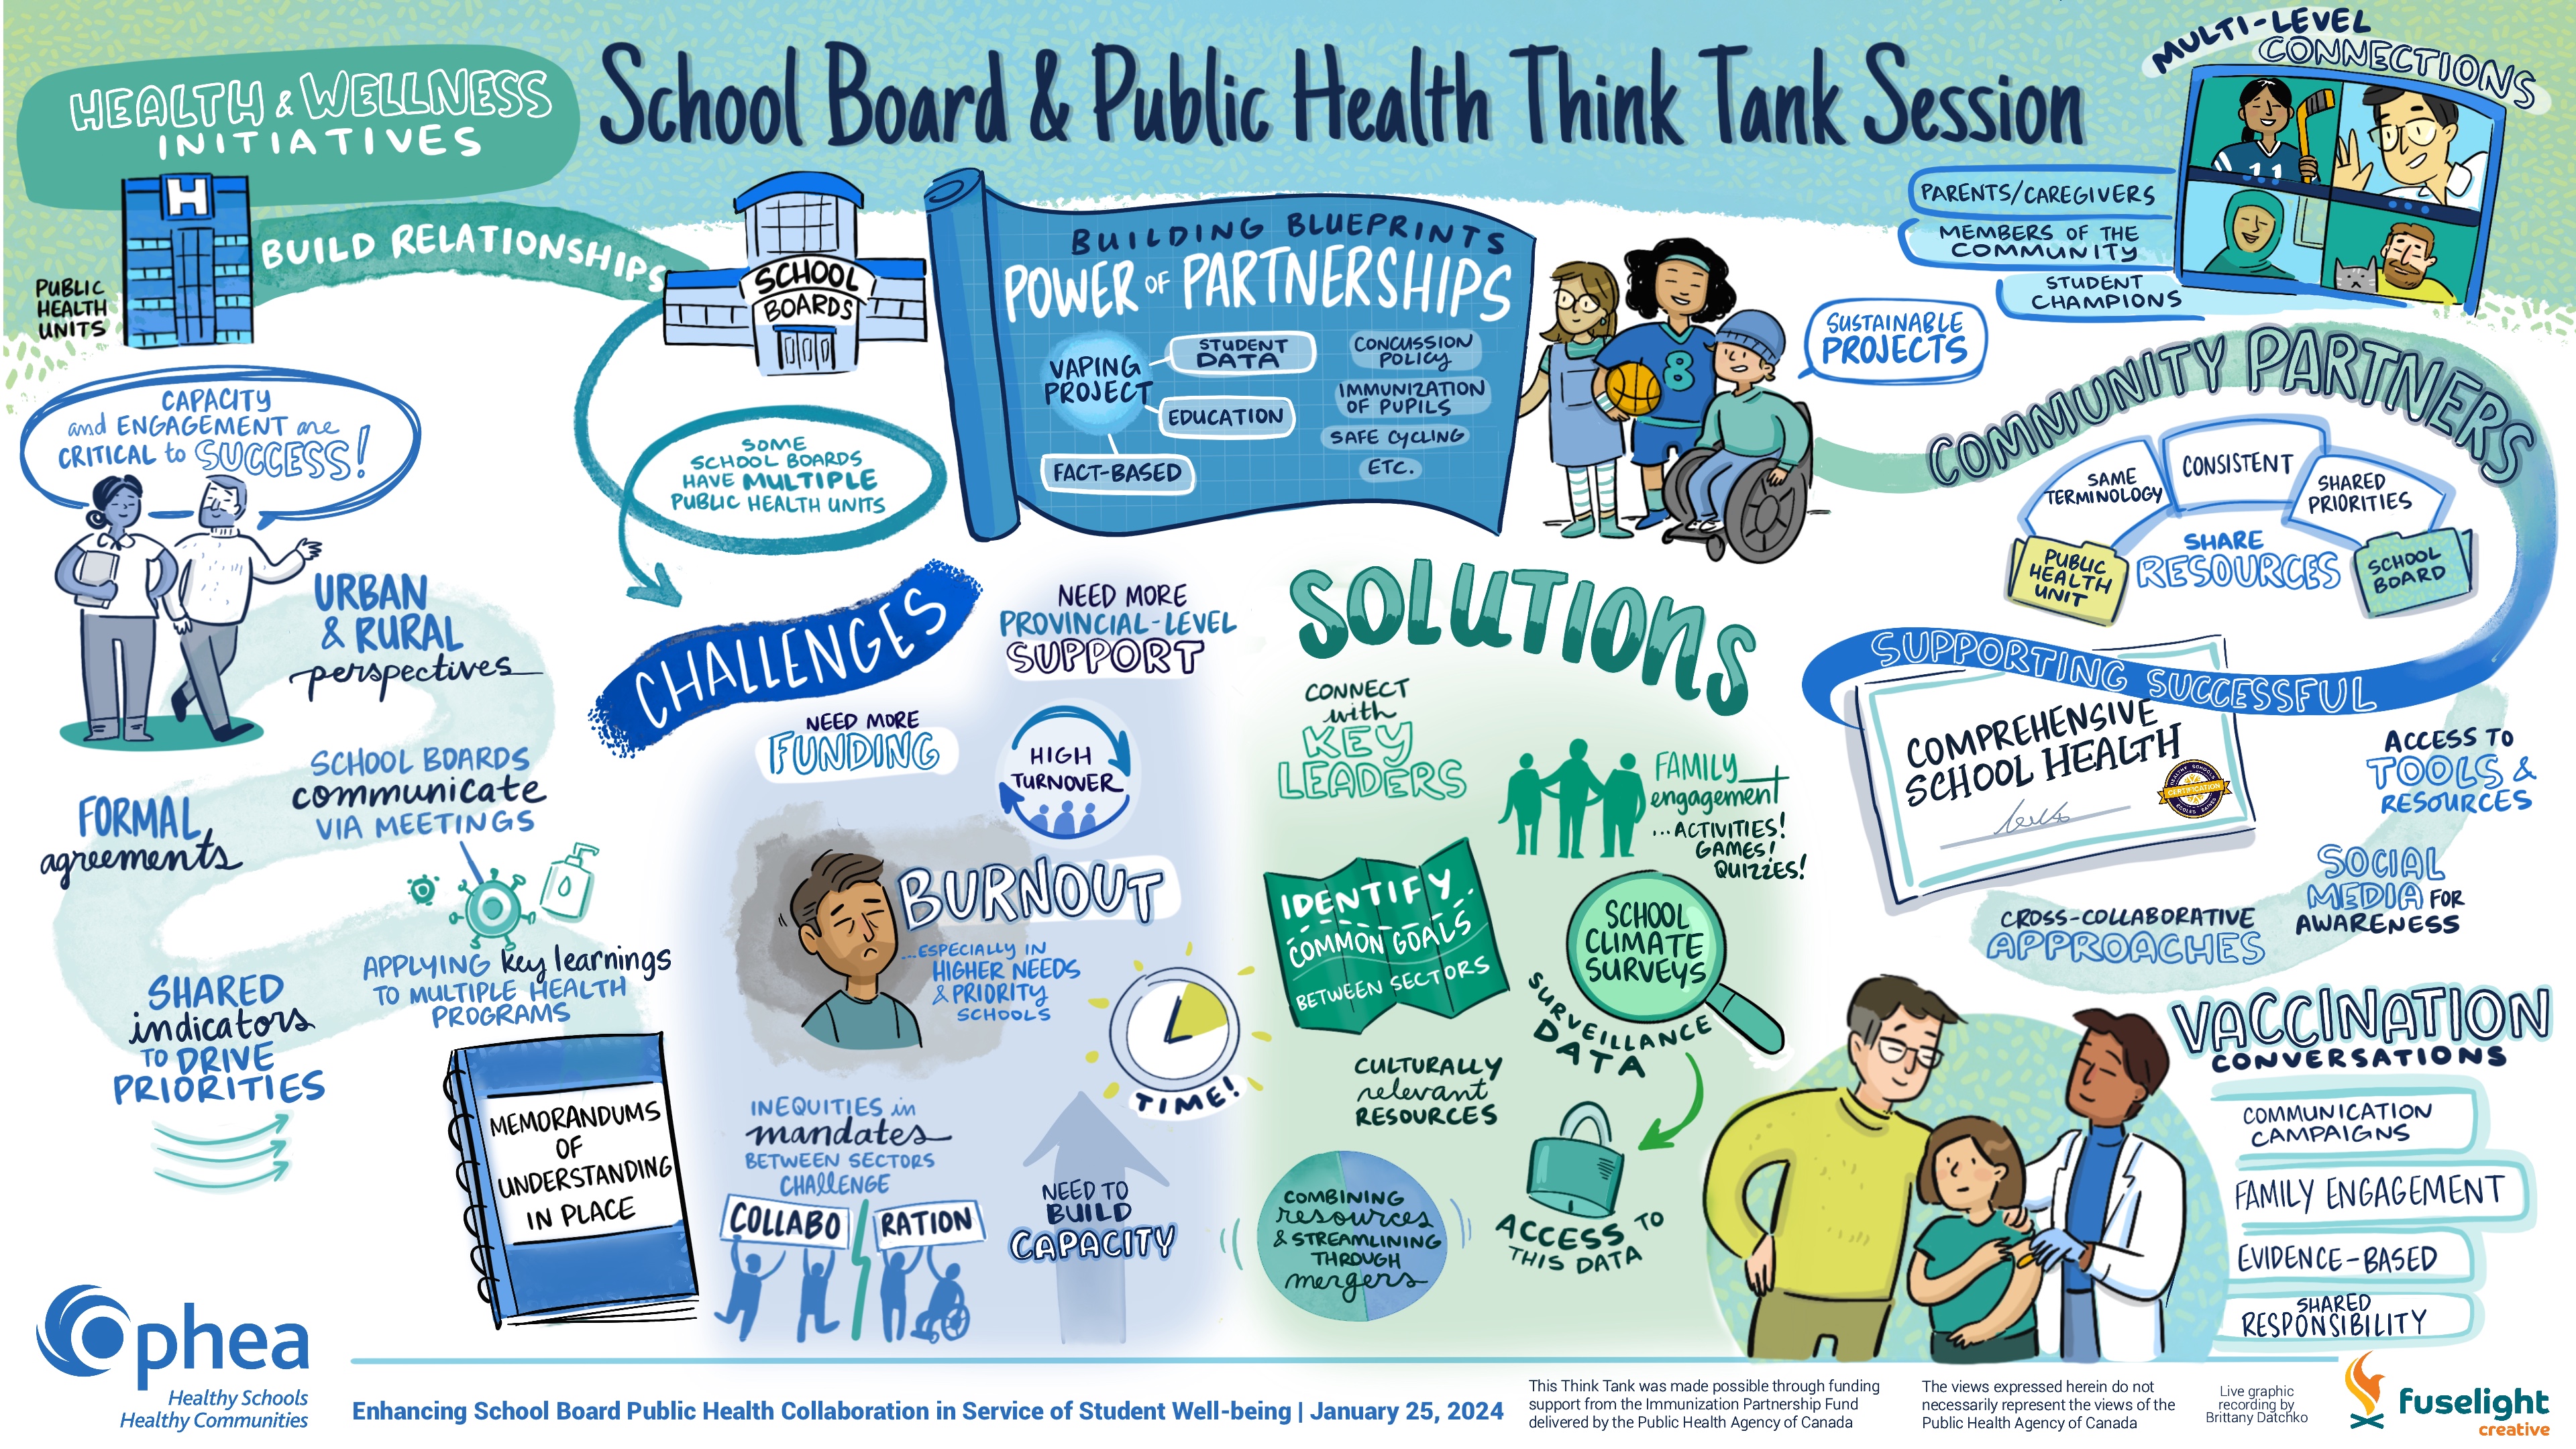 The graphic recording entitled “School Board and Public Health Think Tank Session” aims to capture the main themes and concepts shared during an interactive session highlighting the main barriers, solutions and strategies for successful school board and public health collaboration. 